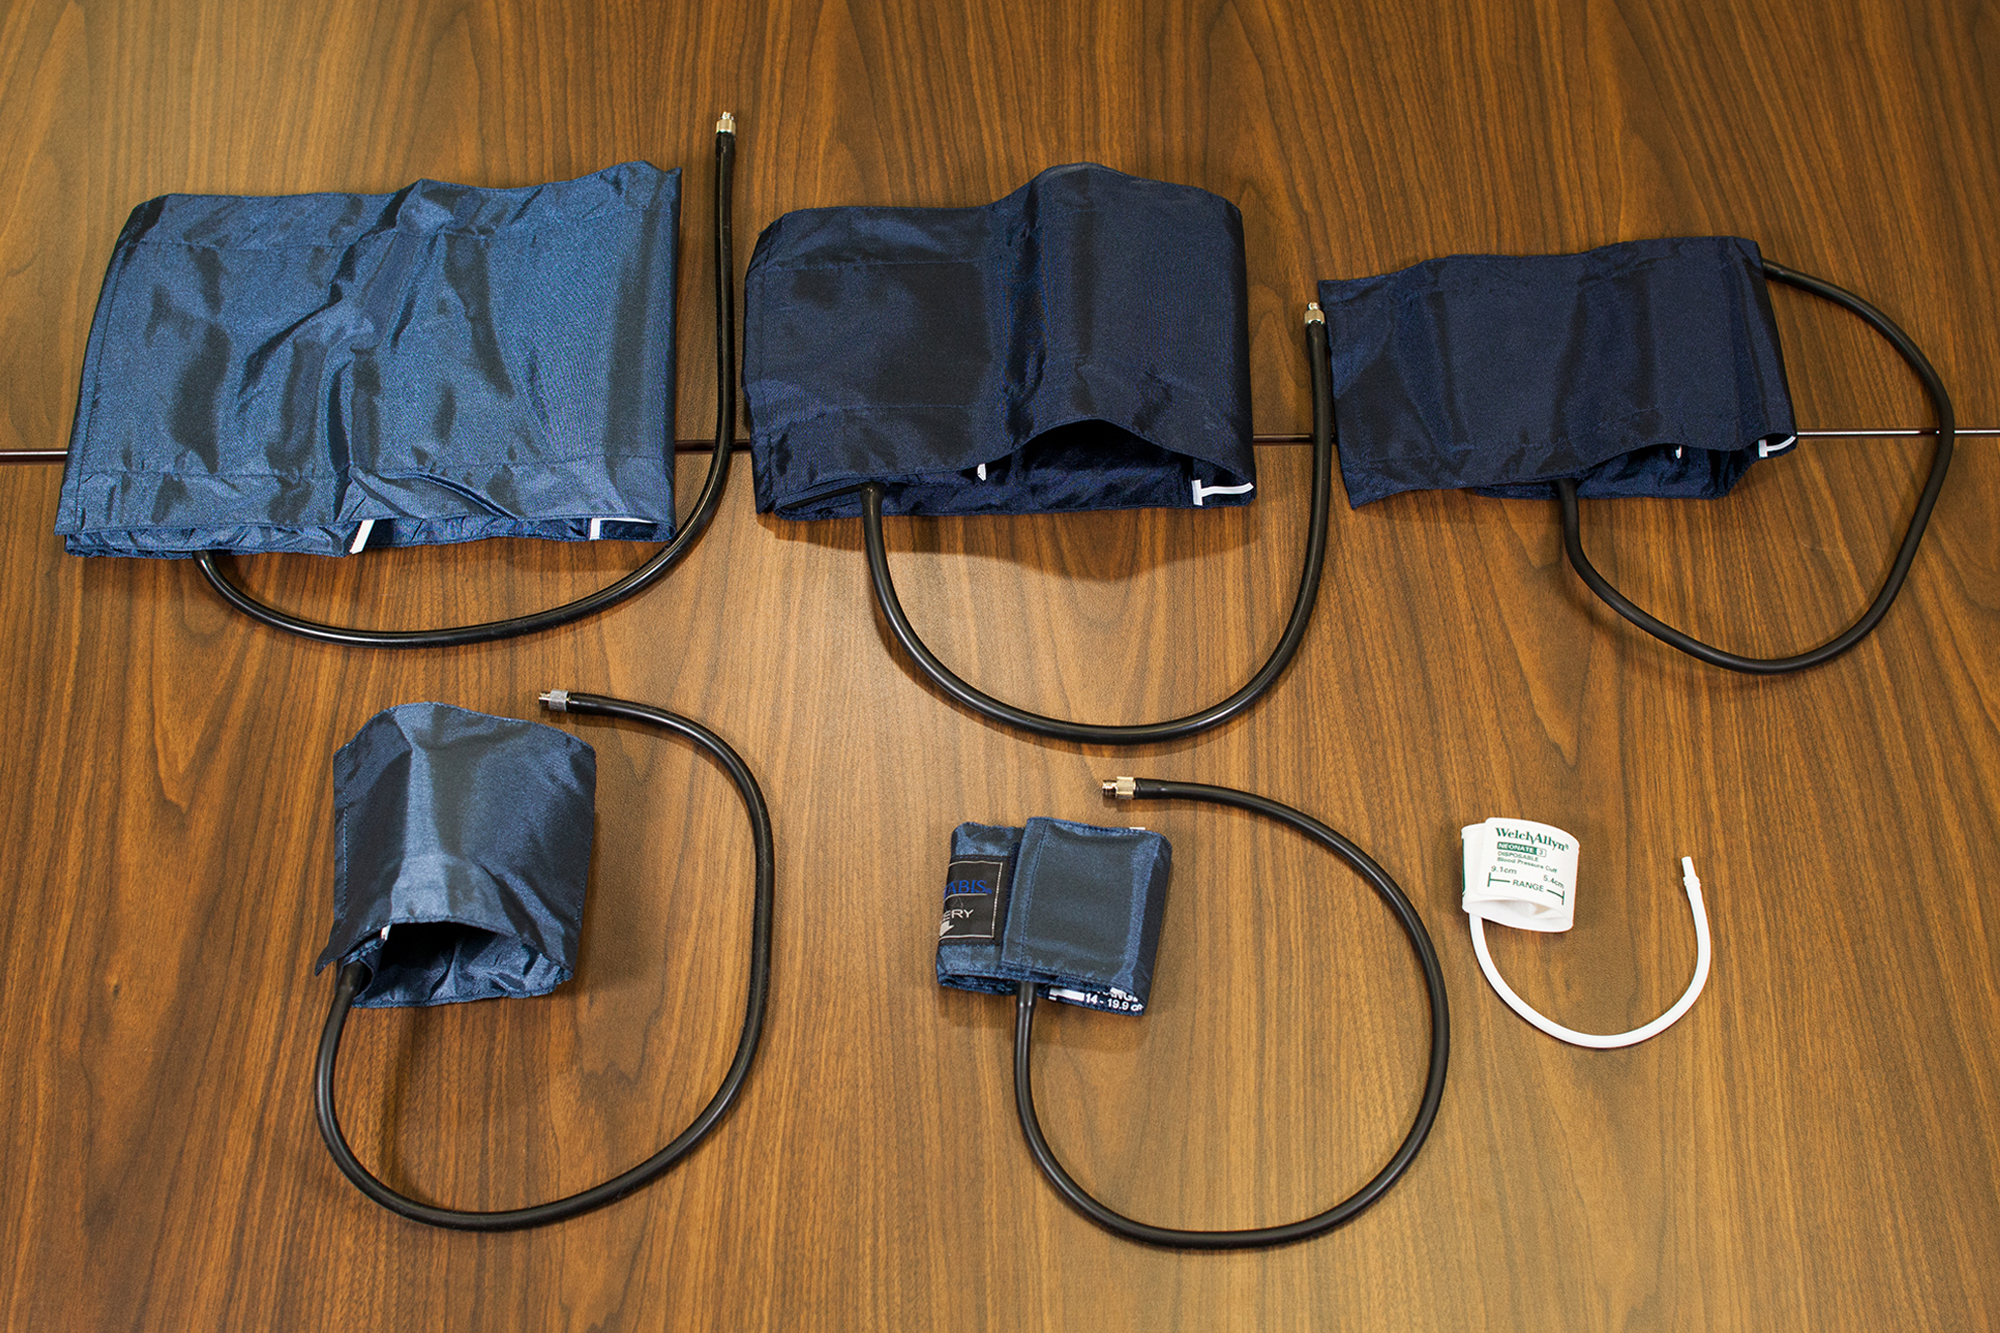 Varying blood pressure cuff sizes ranging from large thigh cuffs to small neonatal cuffs